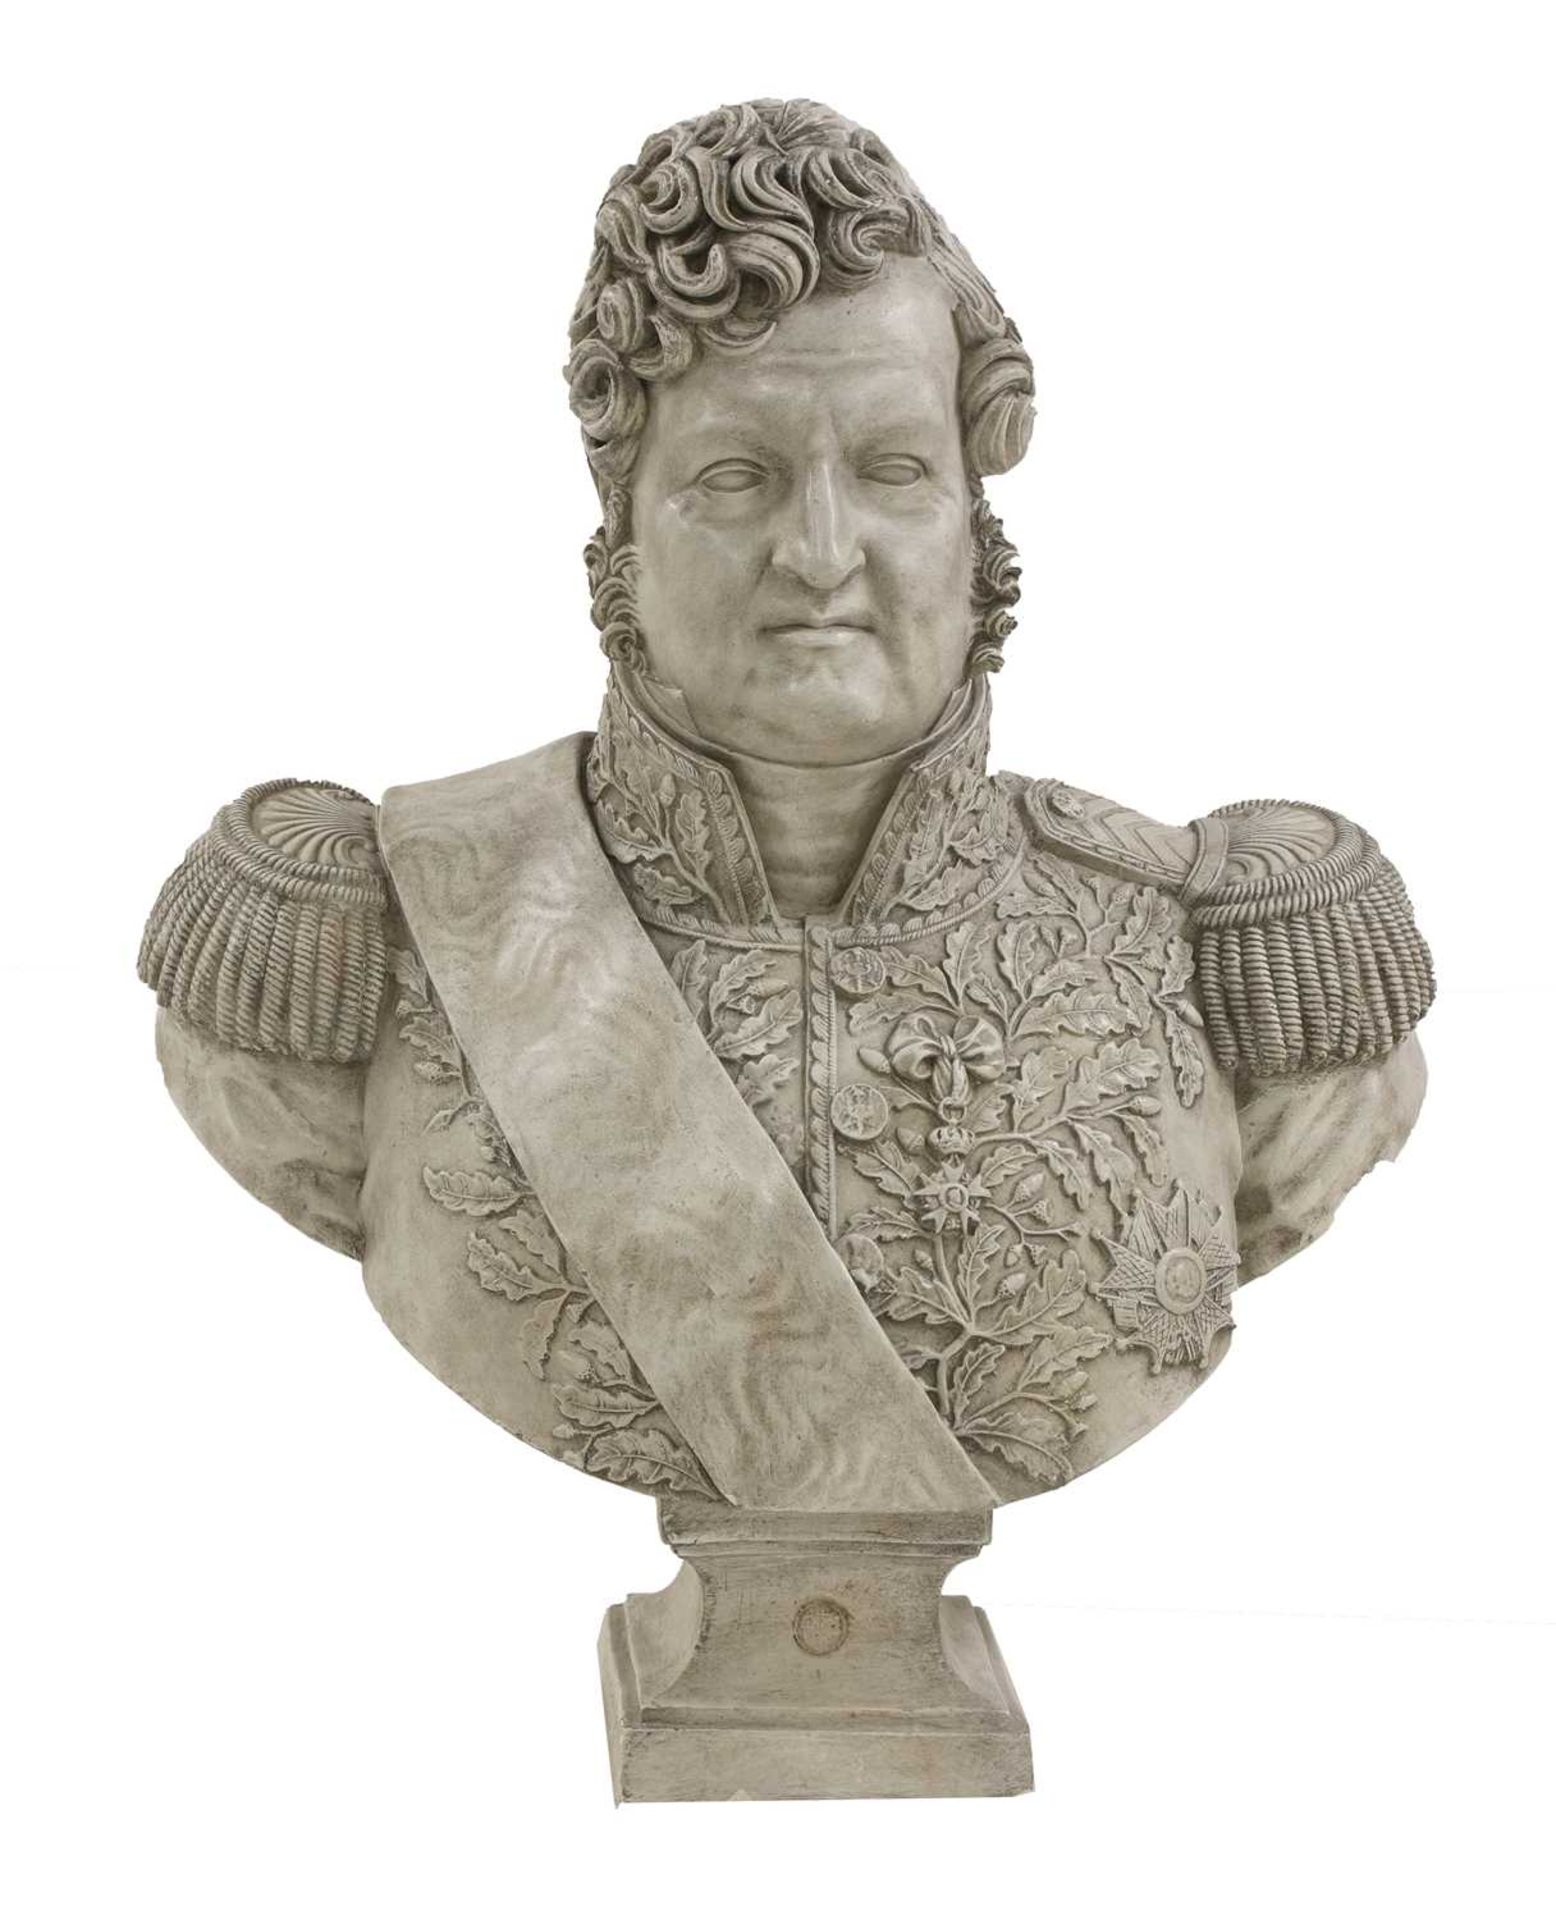 A composition bust of Louis-Philippe, King of the French,